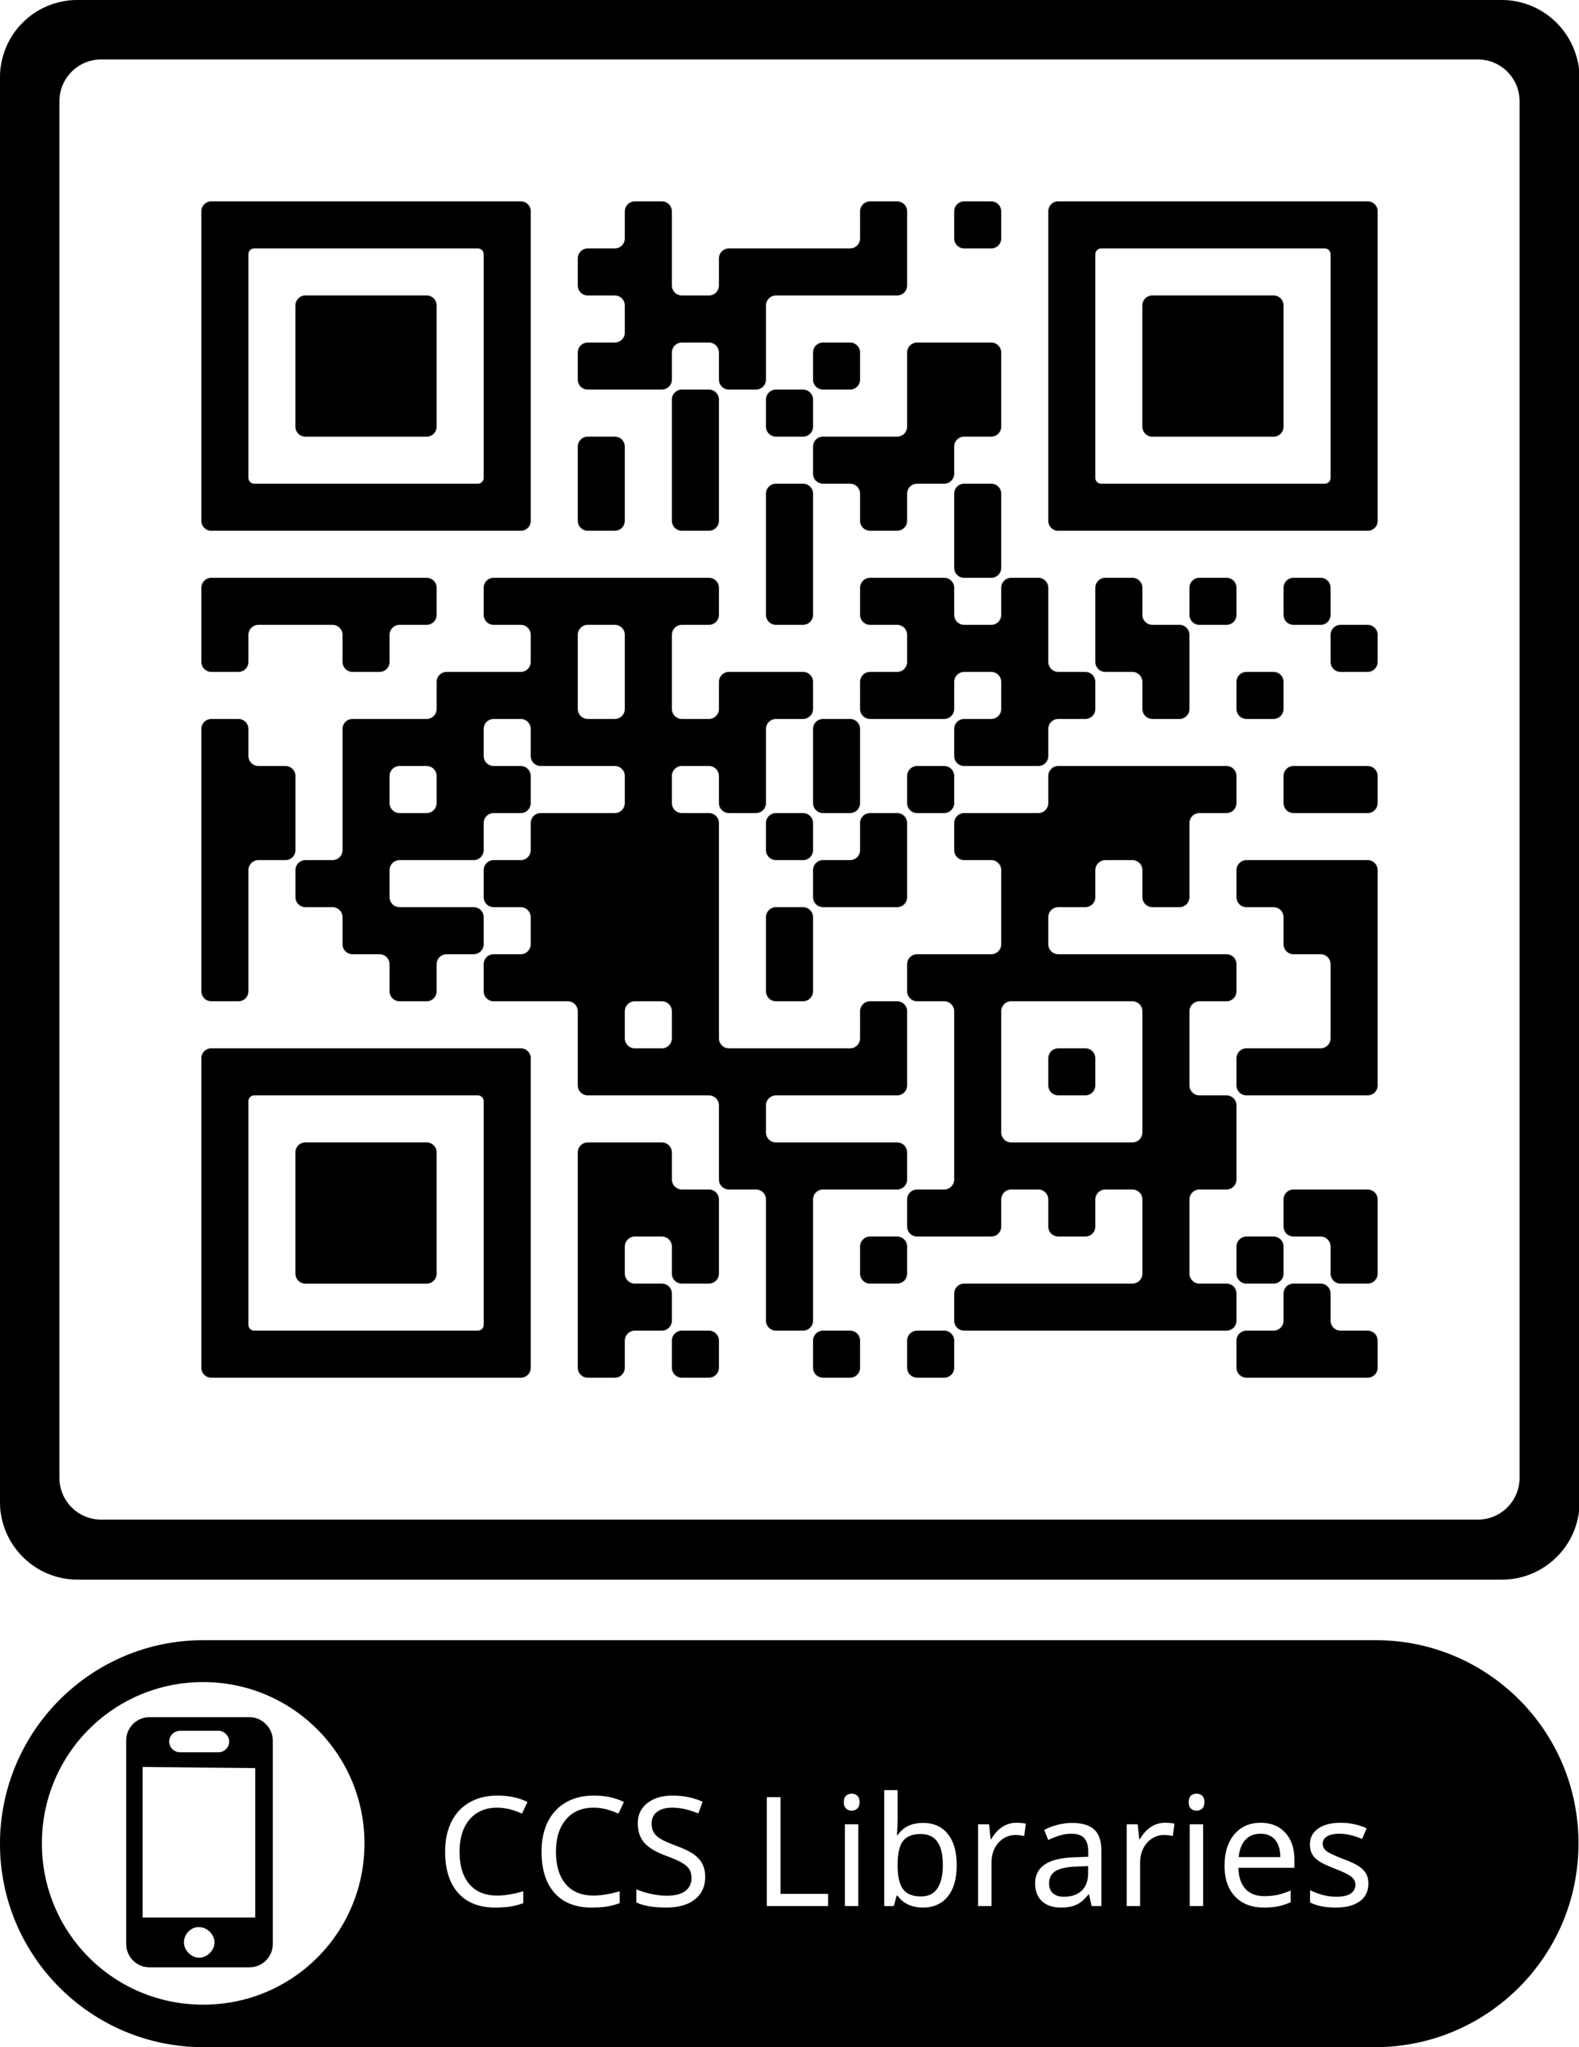 QR Code to CCS Library